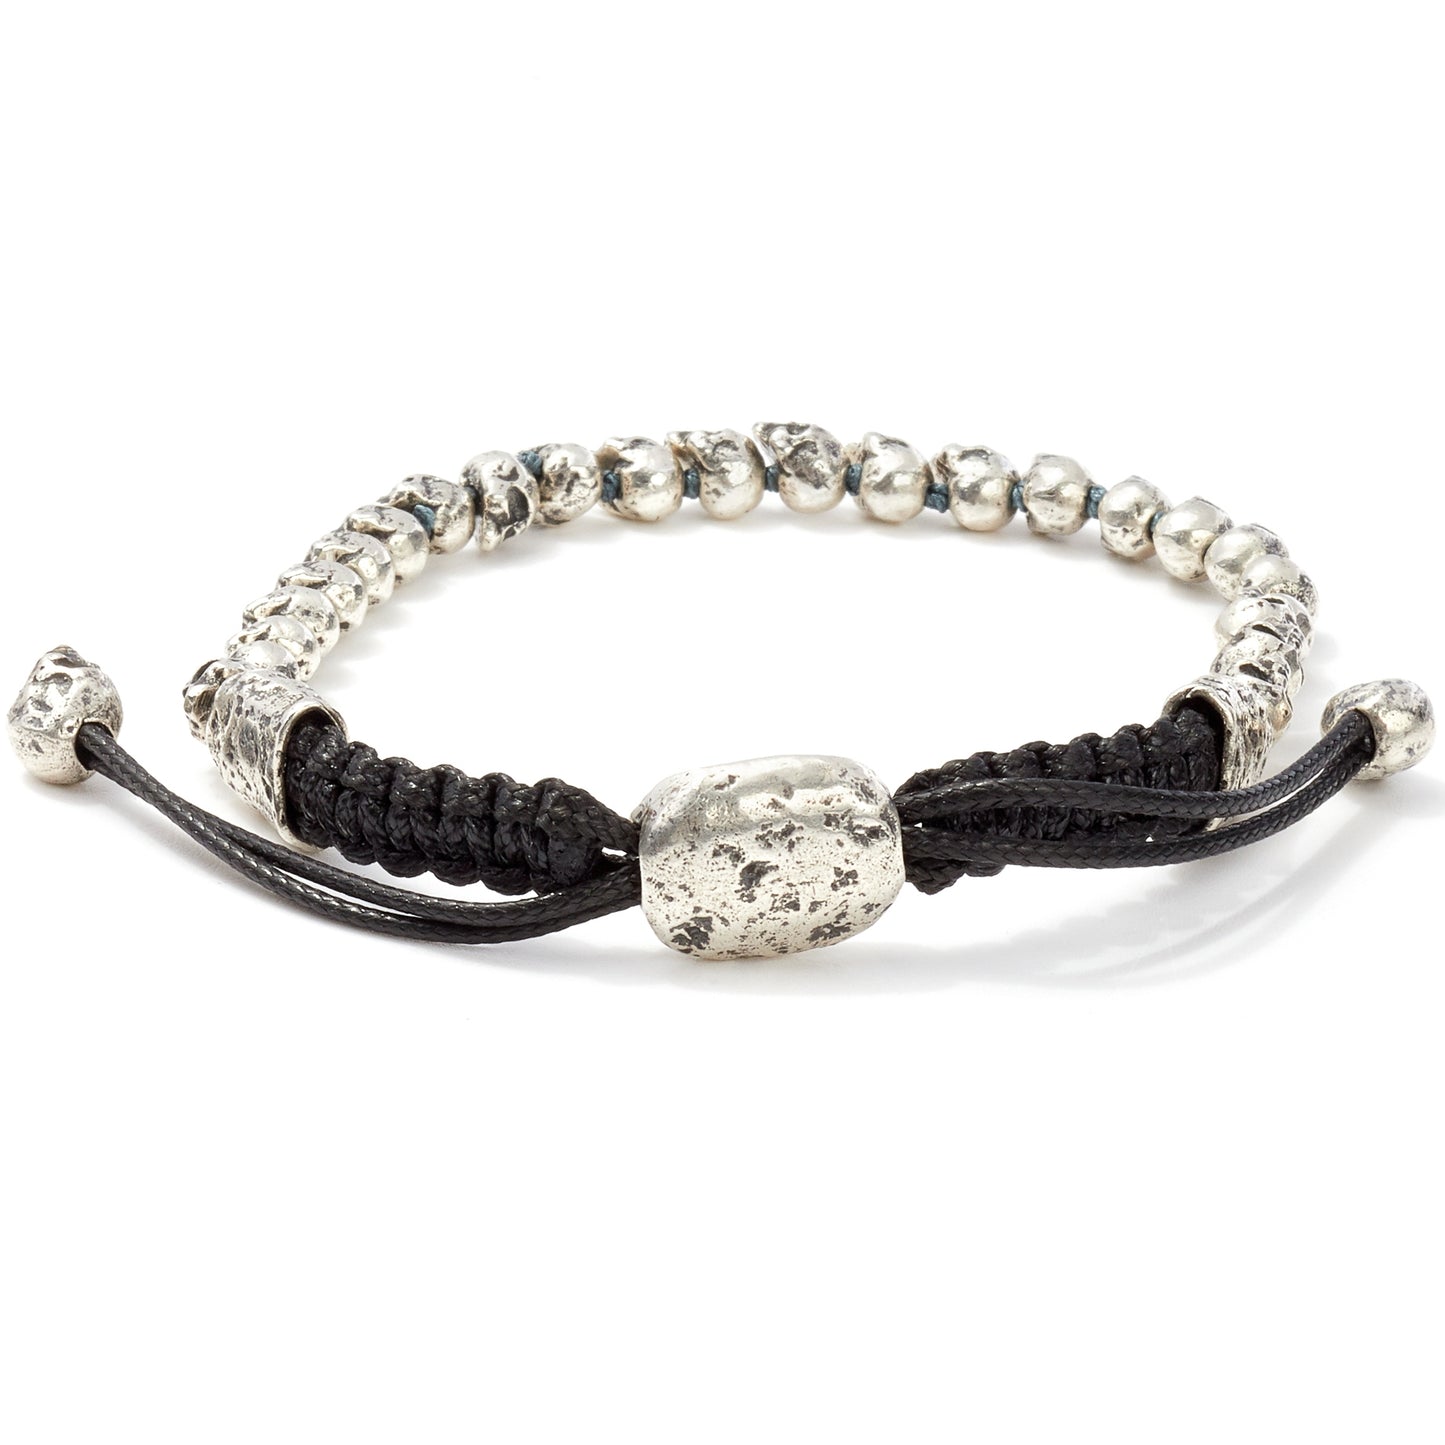 50 Antique Silver Tone Pave Skull Skull Beads With Perfect For European  Bracelet Jewelry And Paracord Accessories From Isabelye, $15.33